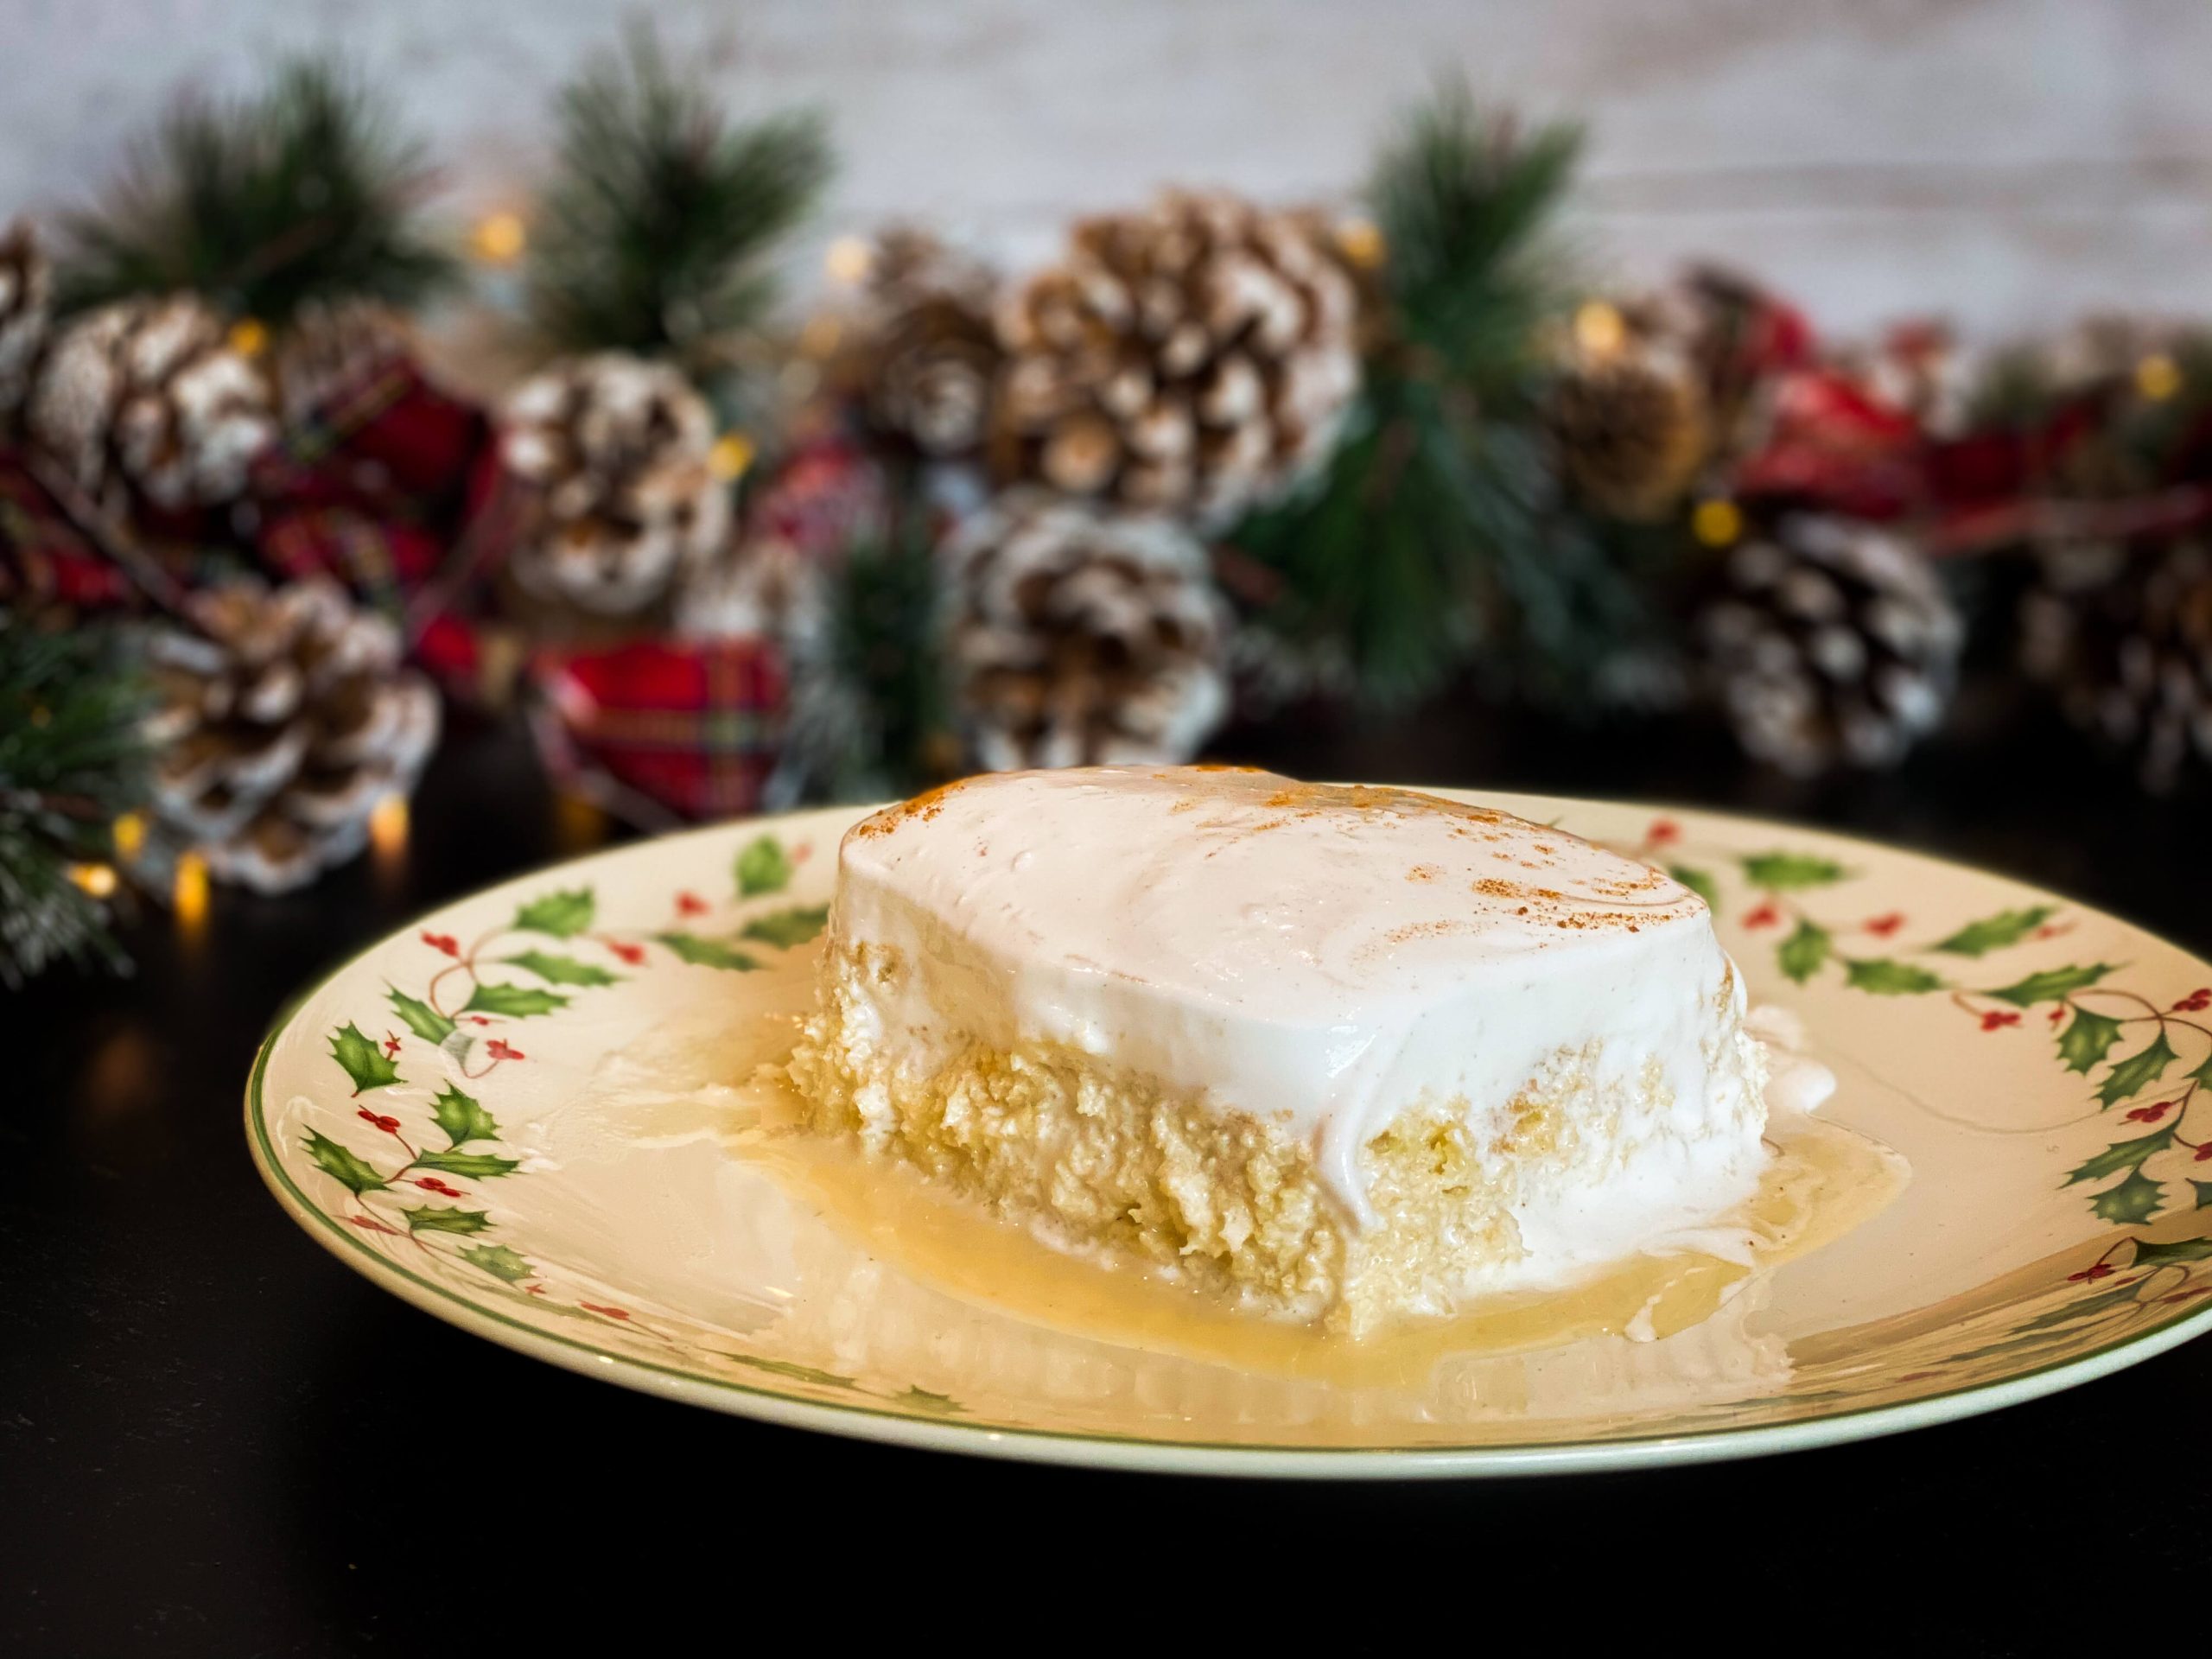 Eggnog tres leches and the layers of the cake and meringue